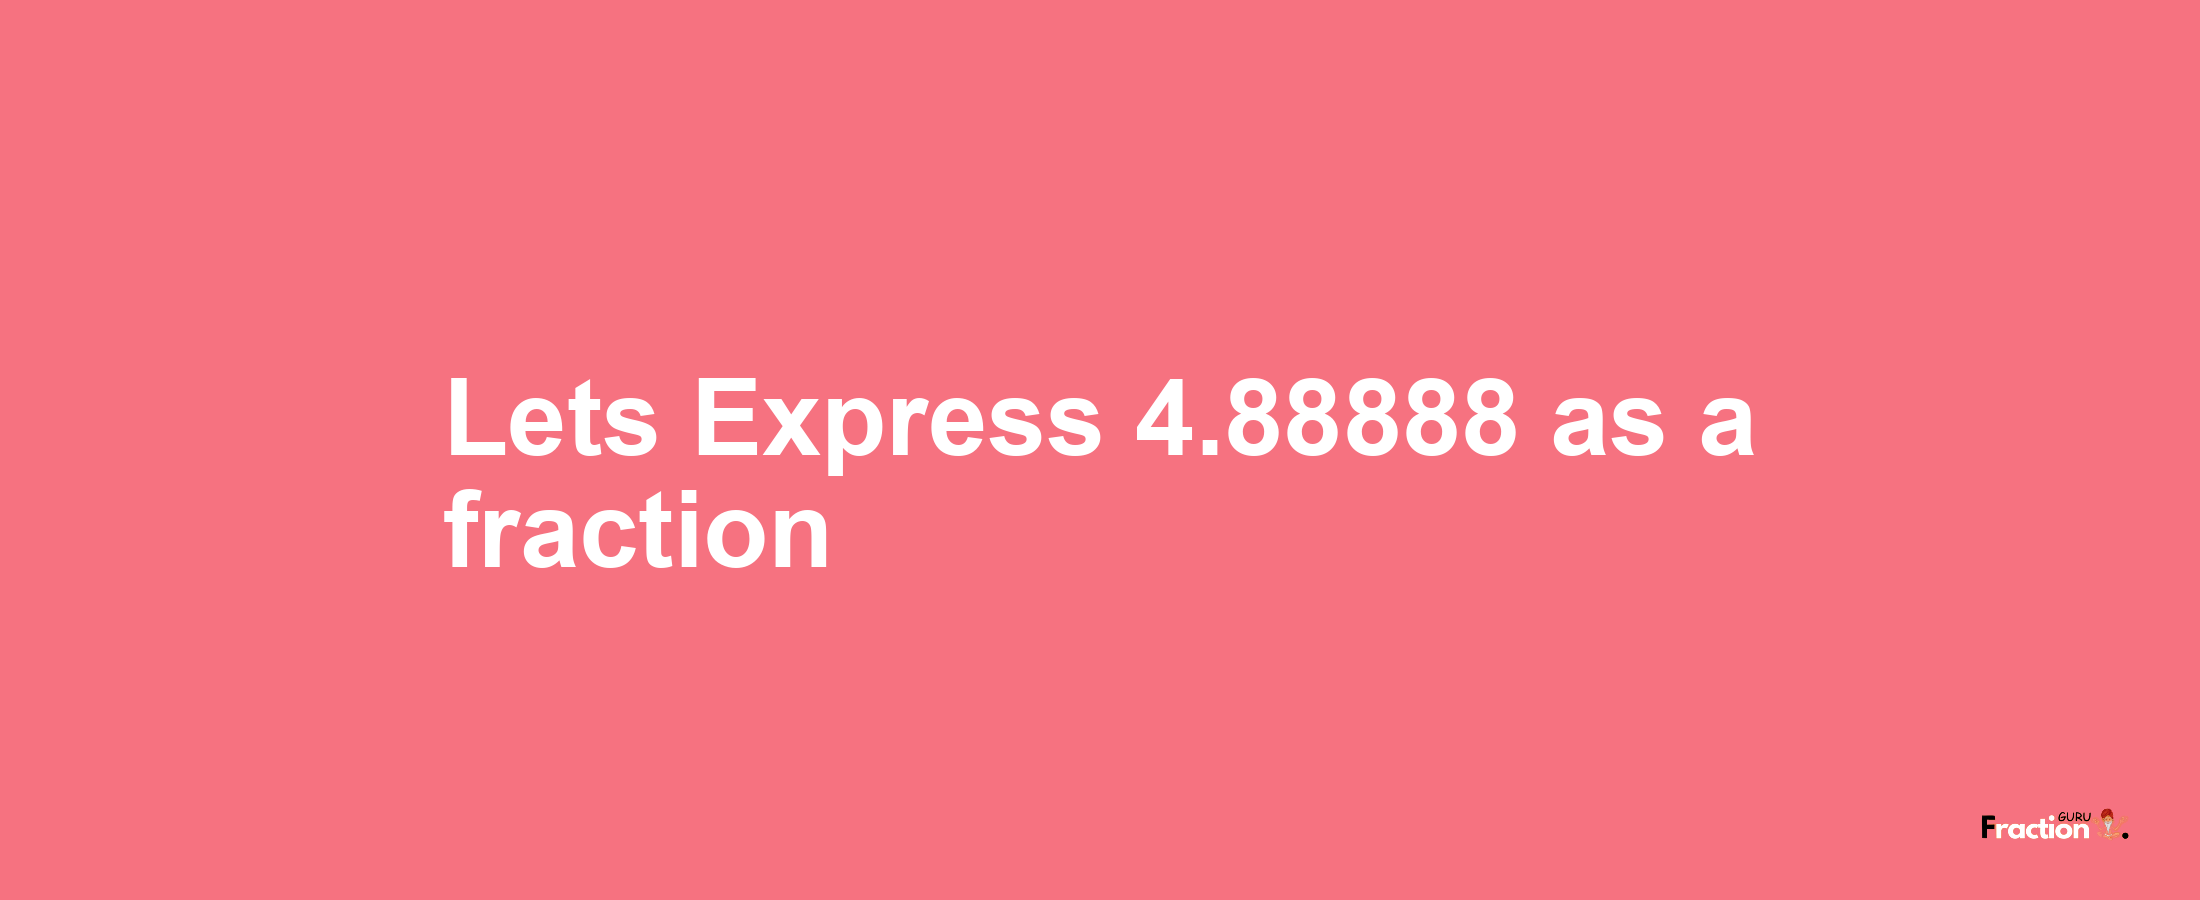 Lets Express 4.88888 as afraction